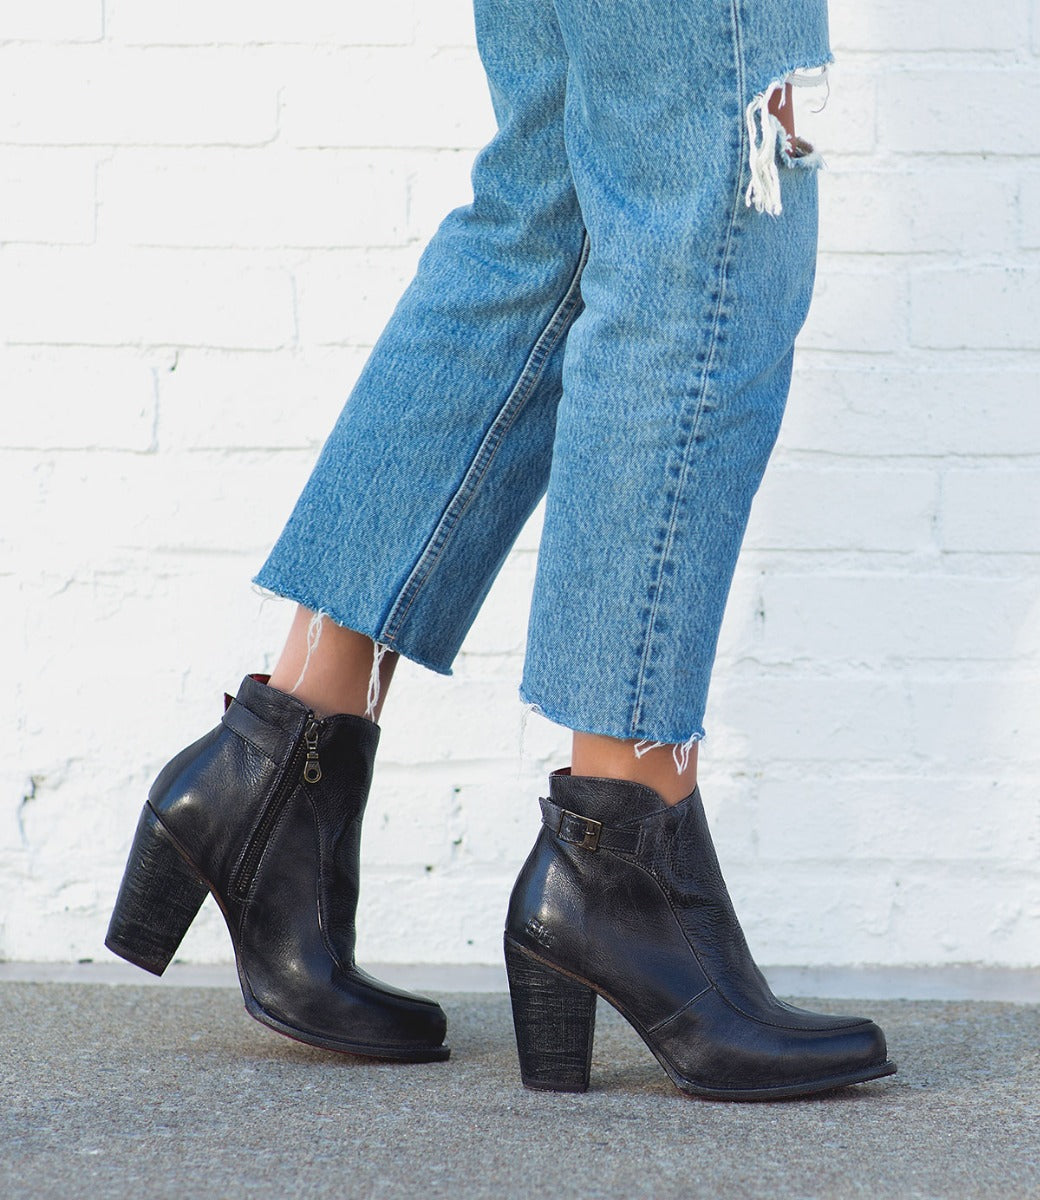 A woman wearing jeans and black Bed Stu Isla ankle boots.